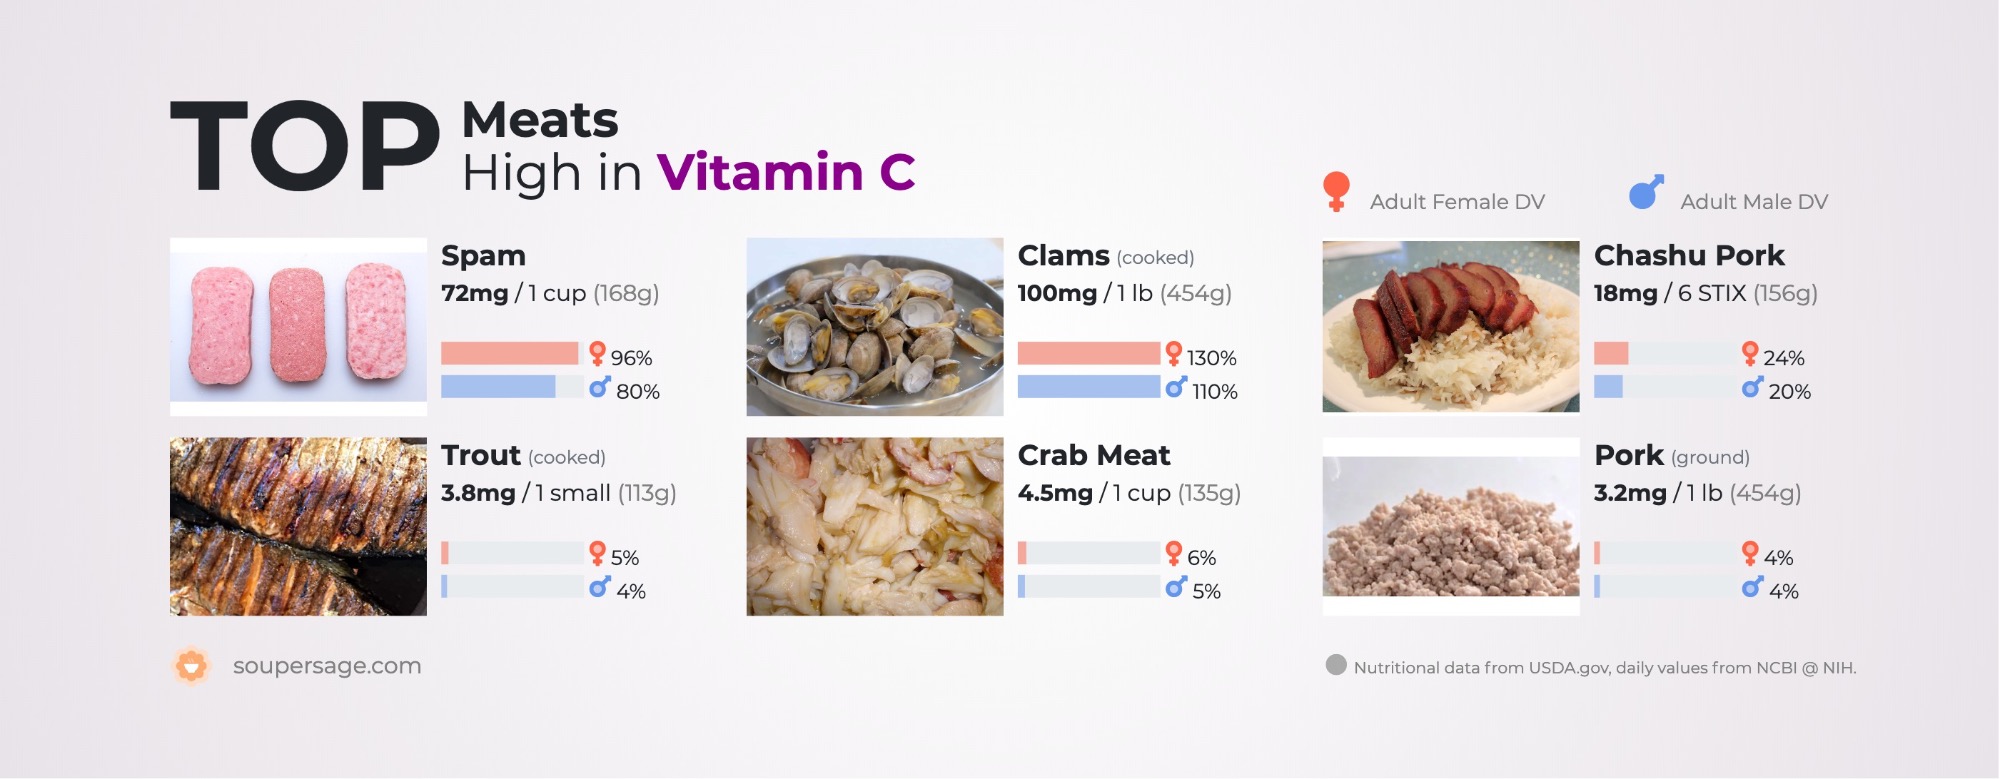 image of Top Meats High in Vitamin C